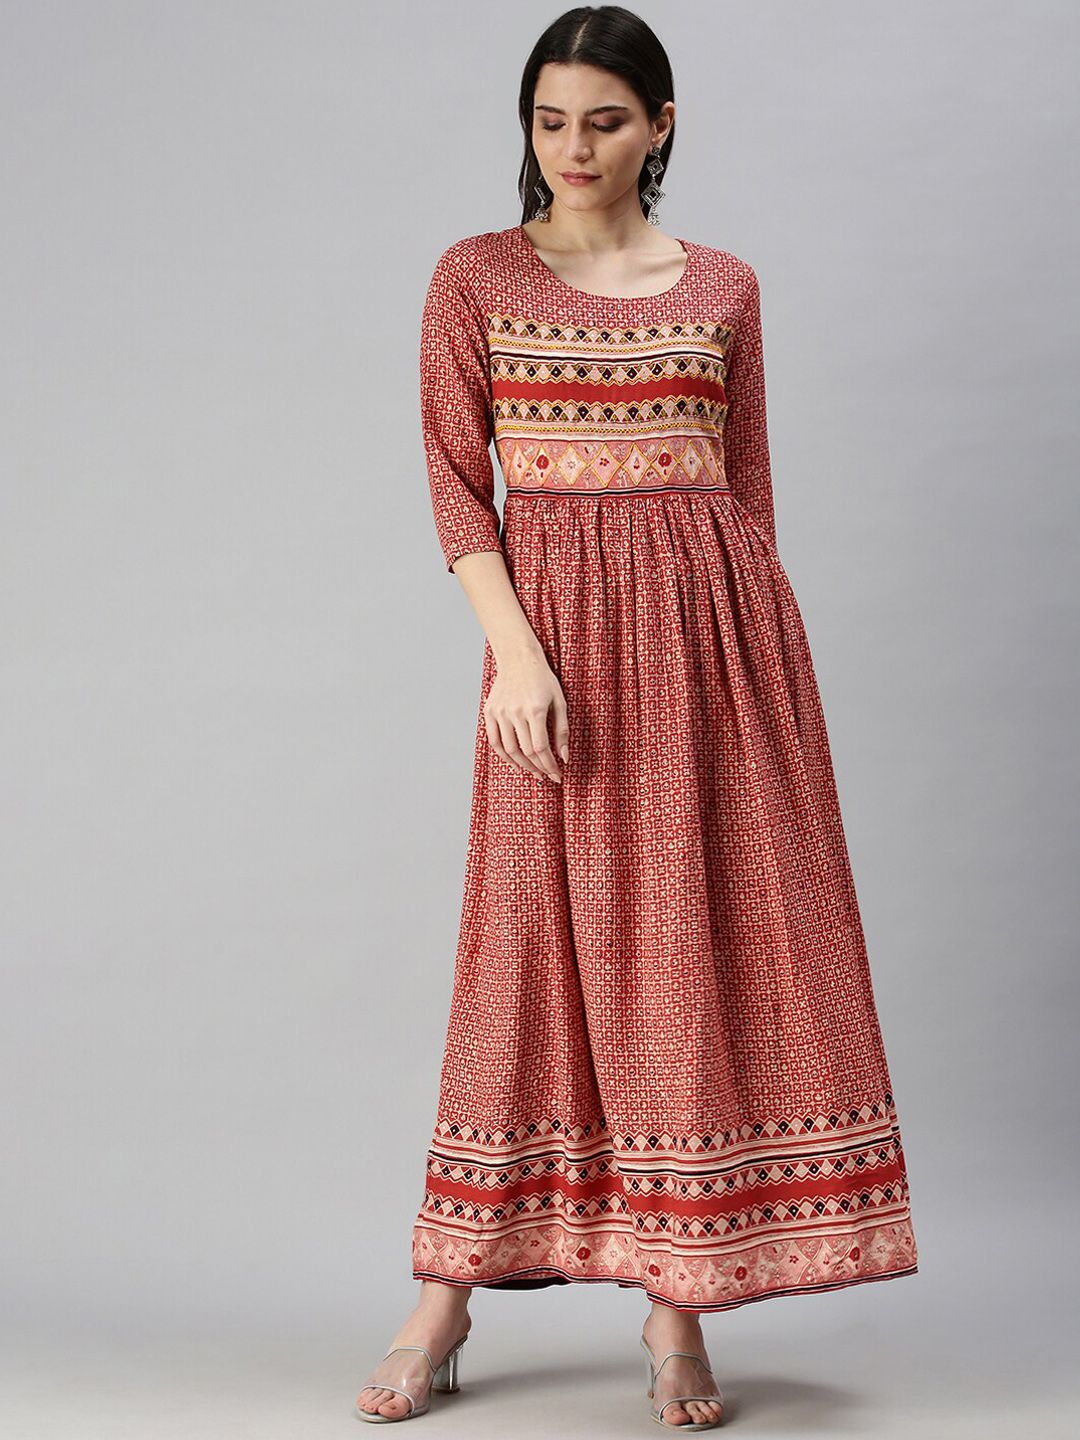 SHOWOFF Ethnic Motifs Printed Cotton Maxi Dress Price in India